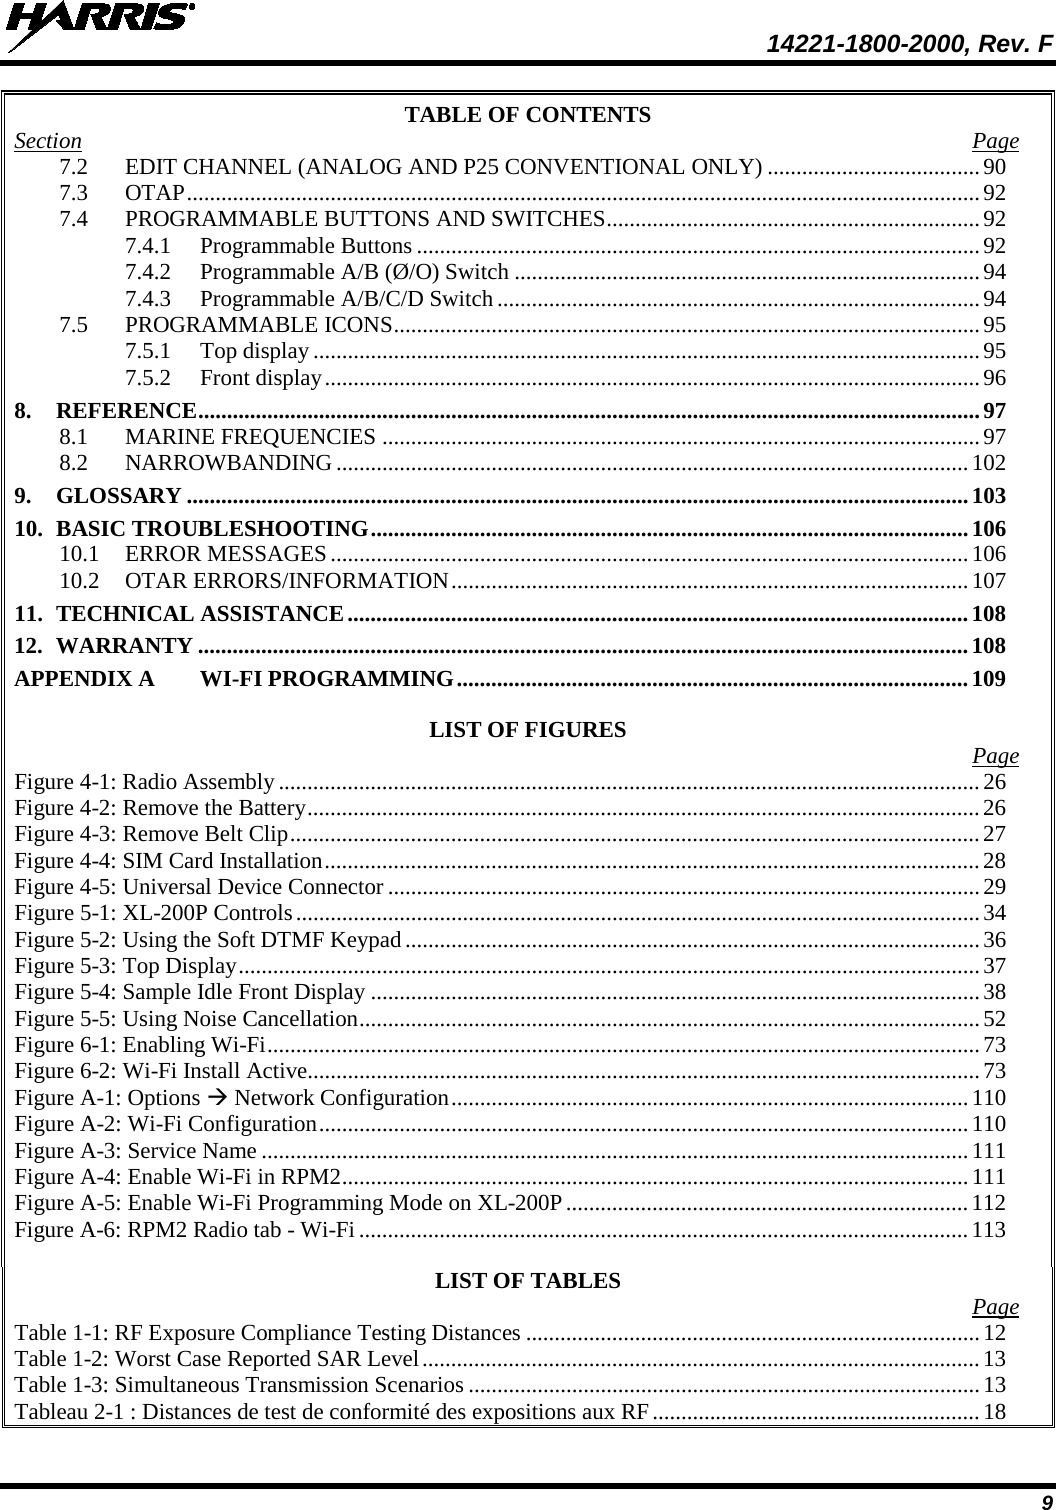  14221-1800-2000, Rev. F 9 TABLE OF CONTENTS Section  Page 7.2 EDIT CHANNEL (ANALOG AND P25 CONVENTIONAL ONLY) ..................................... 90 7.3 OTAP .......................................................................................................................................... 92 7.4 PROGRAMMABLE BUTTONS AND SWITCHES ................................................................. 92 7.4.1 Programmable Buttons .................................................................................................. 92 7.4.2 Programmable A/B (Ø/O) Switch ................................................................................. 94 7.4.3 Programmable A/B/C/D Switch .................................................................................... 94 7.5 PROGRAMMABLE ICONS ...................................................................................................... 95 7.5.1 Top display .................................................................................................................... 95 7.5.2 Front display .................................................................................................................. 96 8. REFERENCE ........................................................................................................................................ 97 8.1 MARINE FREQUENCIES ........................................................................................................ 97 8.2 NARROWBANDING .............................................................................................................. 102 9. GLOSSARY ........................................................................................................................................ 103 10. BASIC TROUBLESHOOTING ........................................................................................................ 106 10.1 ERROR MESSAGES ............................................................................................................... 106 10.2 OTAR ERRORS/INFORMATION .......................................................................................... 107 11. TECHNICAL ASSISTANCE ............................................................................................................ 108 12. WARRANTY ...................................................................................................................................... 108 APPENDIX A WI-FI PROGRAMMING ......................................................................................... 109  LIST OF FIGURES   Page Figure 4-1: Radio Assembly .......................................................................................................................... 26 Figure 4-2: Remove the Battery ..................................................................................................................... 26 Figure 4-3: Remove Belt Clip ........................................................................................................................ 27 Figure 4-4: SIM Card Installation .................................................................................................................. 28 Figure 4-5: Universal Device Connector ....................................................................................................... 29 Figure 5-1: XL-200P Controls ....................................................................................................................... 34 Figure 5-2: Using the Soft DTMF Keypad .................................................................................................... 36 Figure 5-3: Top Display ................................................................................................................................. 37 Figure 5-4: Sample Idle Front Display .......................................................................................................... 38 Figure 5-5: Using Noise Cancellation ............................................................................................................ 52 Figure 6-1: Enabling Wi-Fi ............................................................................................................................ 73 Figure 6-2: Wi-Fi Install Active ..................................................................................................................... 73 Figure A-1: Options  Network Configuration .......................................................................................... 110 Figure A-2: Wi-Fi Configuration ................................................................................................................. 110 Figure A-3: Service Name ........................................................................................................................... 111 Figure A-4: Enable Wi-Fi in RPM2 ............................................................................................................. 111 Figure A-5: Enable Wi-Fi Programming Mode on XL-200P ...................................................................... 112 Figure A-6: RPM2 Radio tab - Wi-Fi .......................................................................................................... 113  LIST OF TABLES   Page Table 1-1: RF Exposure Compliance Testing Distances ............................................................................... 12 Table 1-2: Worst Case Reported SAR Level ................................................................................................. 13 Table 1-3: Simultaneous Transmission Scenarios ......................................................................................... 13 Tableau 2-1 : Distances de test de conformité des expositions aux RF ......................................................... 18 